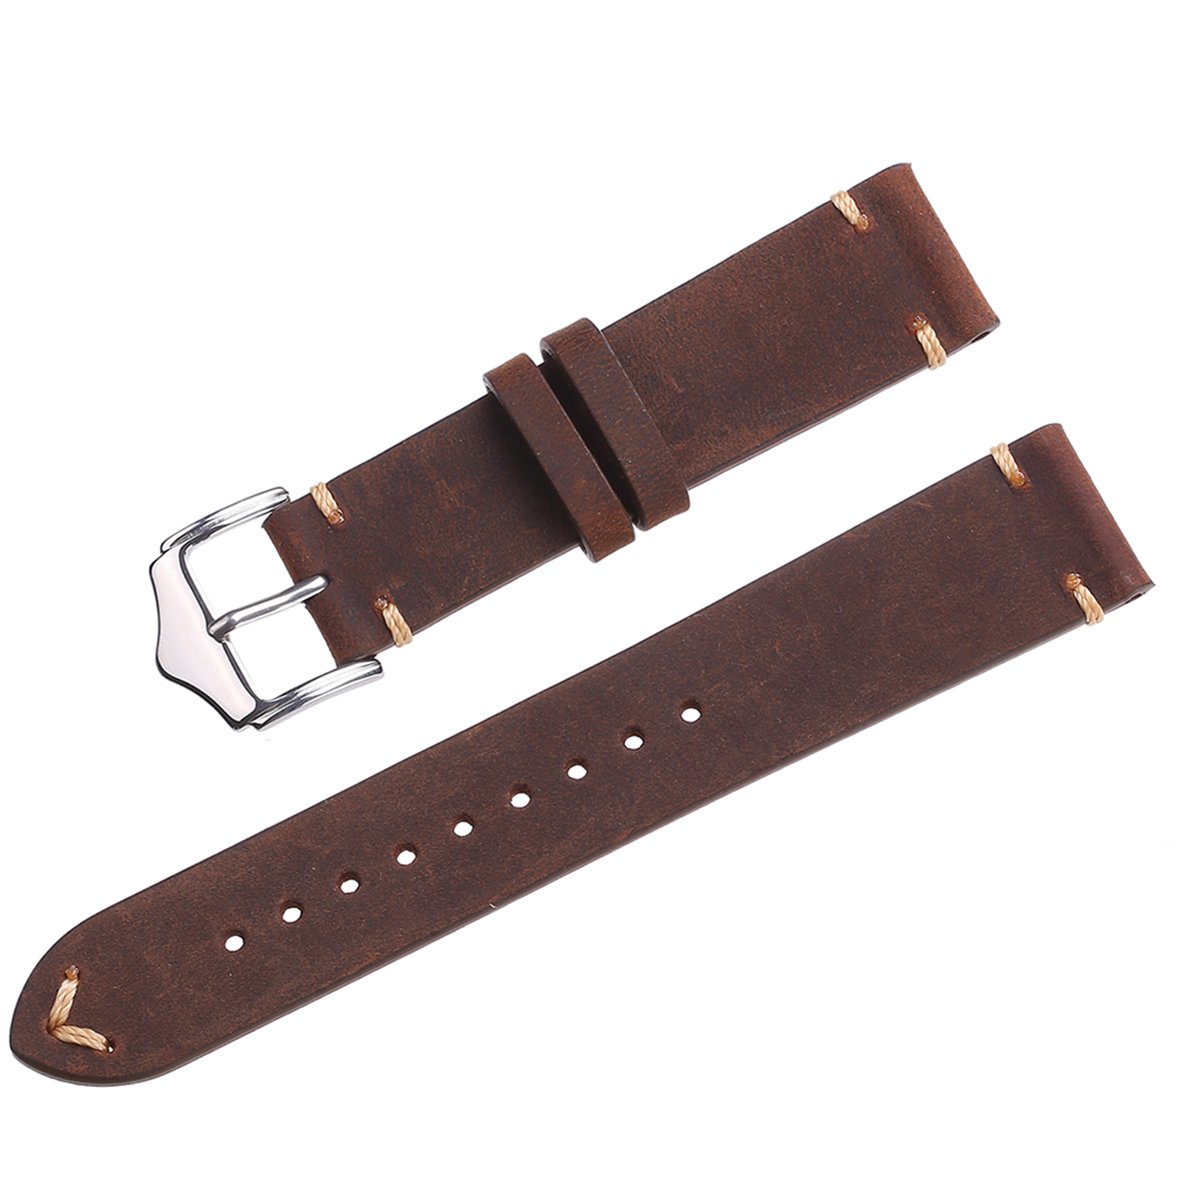 EACHE Leather Watch Bands For Men Vintage Watch Straps For Women Crazy Horse/Oil Wax/Suede/Vegetable-Tanned Leather Replacement Watchband 18mm 19mm 20mm 22mm